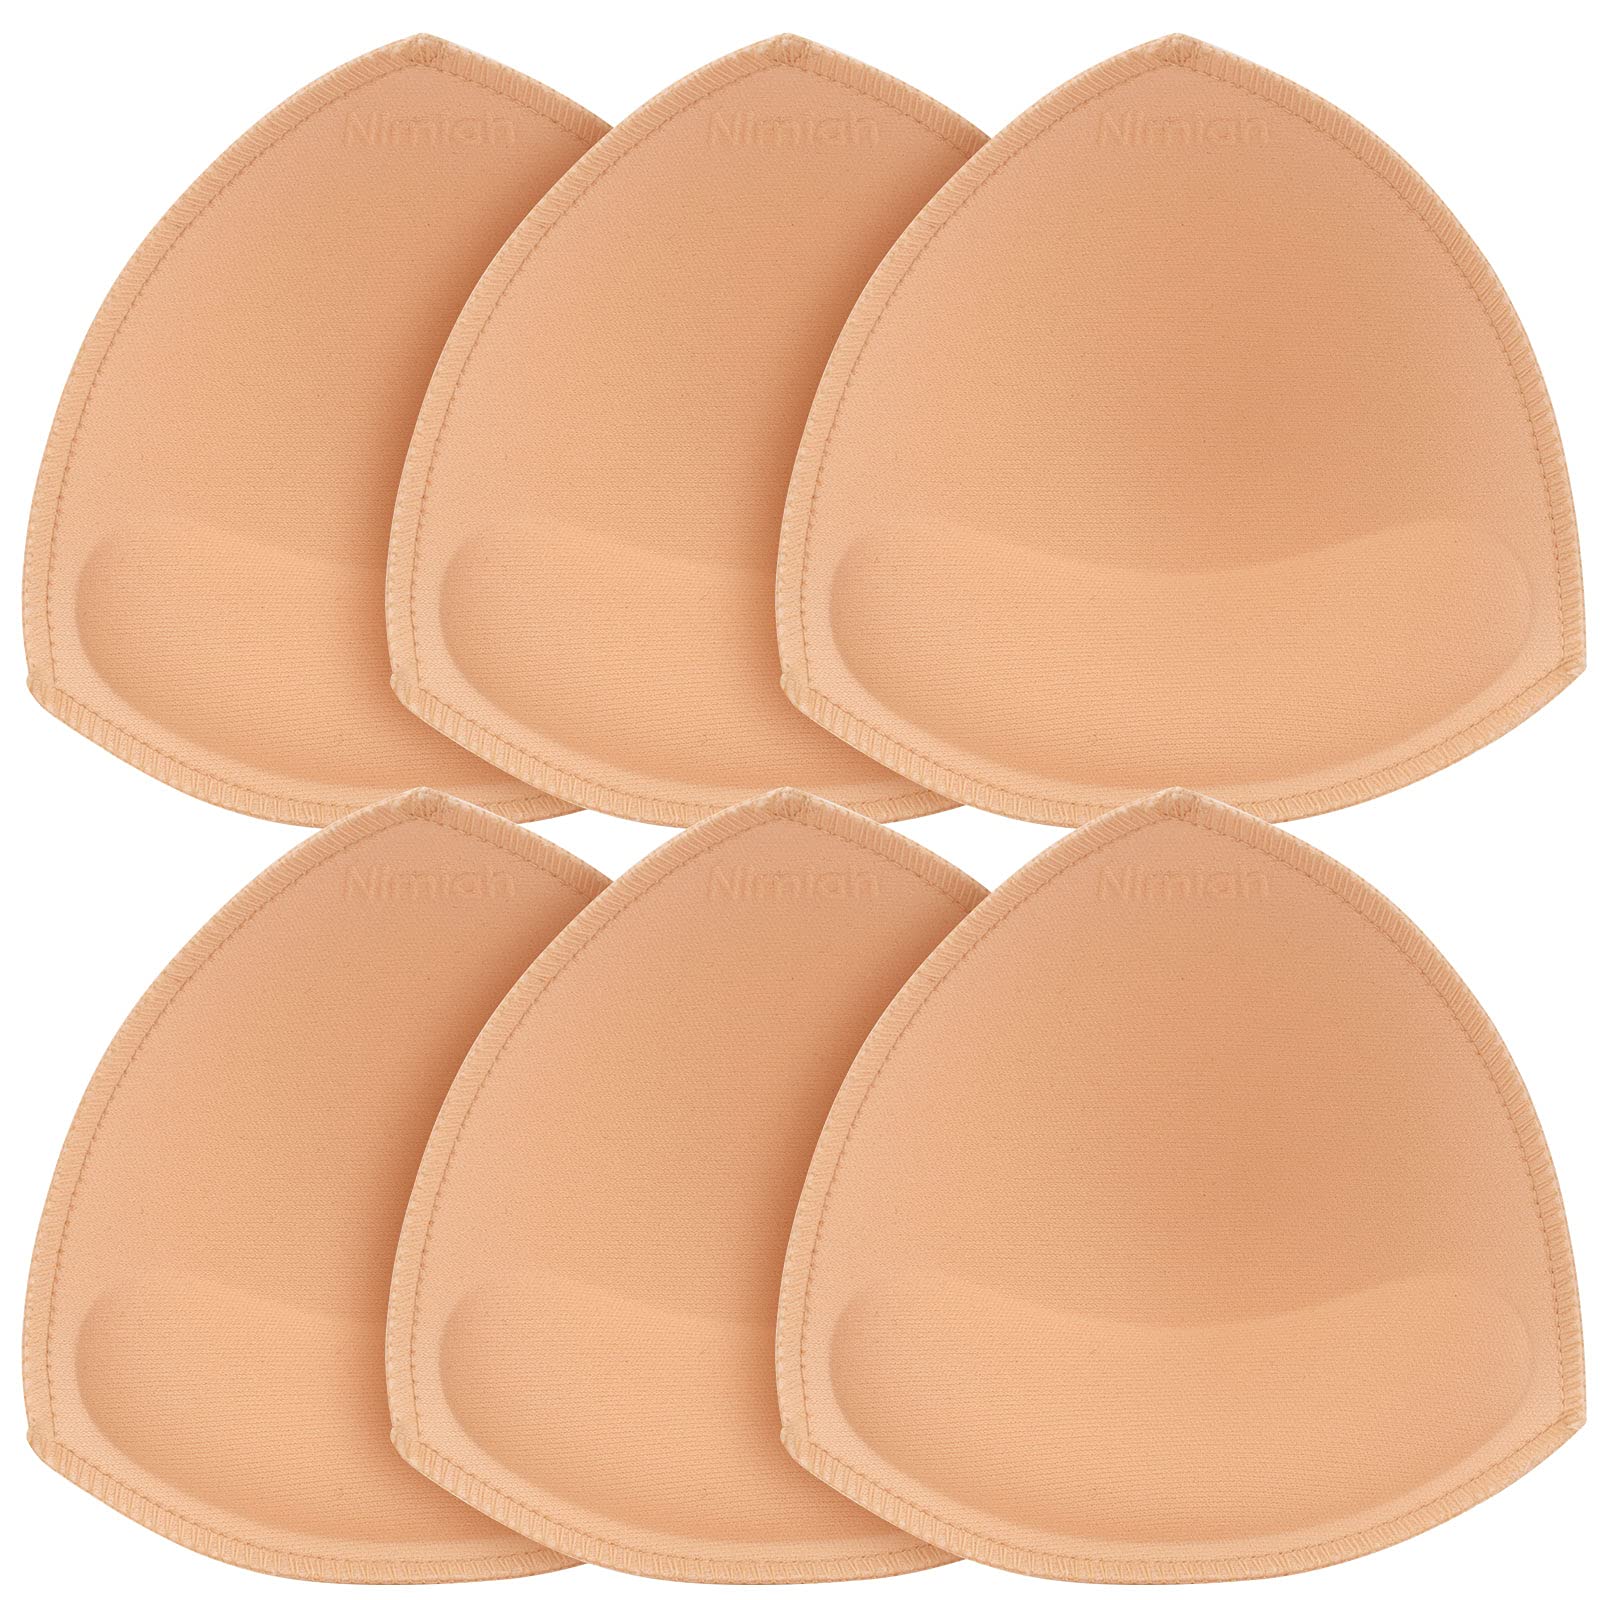 WMugthome 3 pairs DD/E Cup Bra Inserts Pads Specialized For large